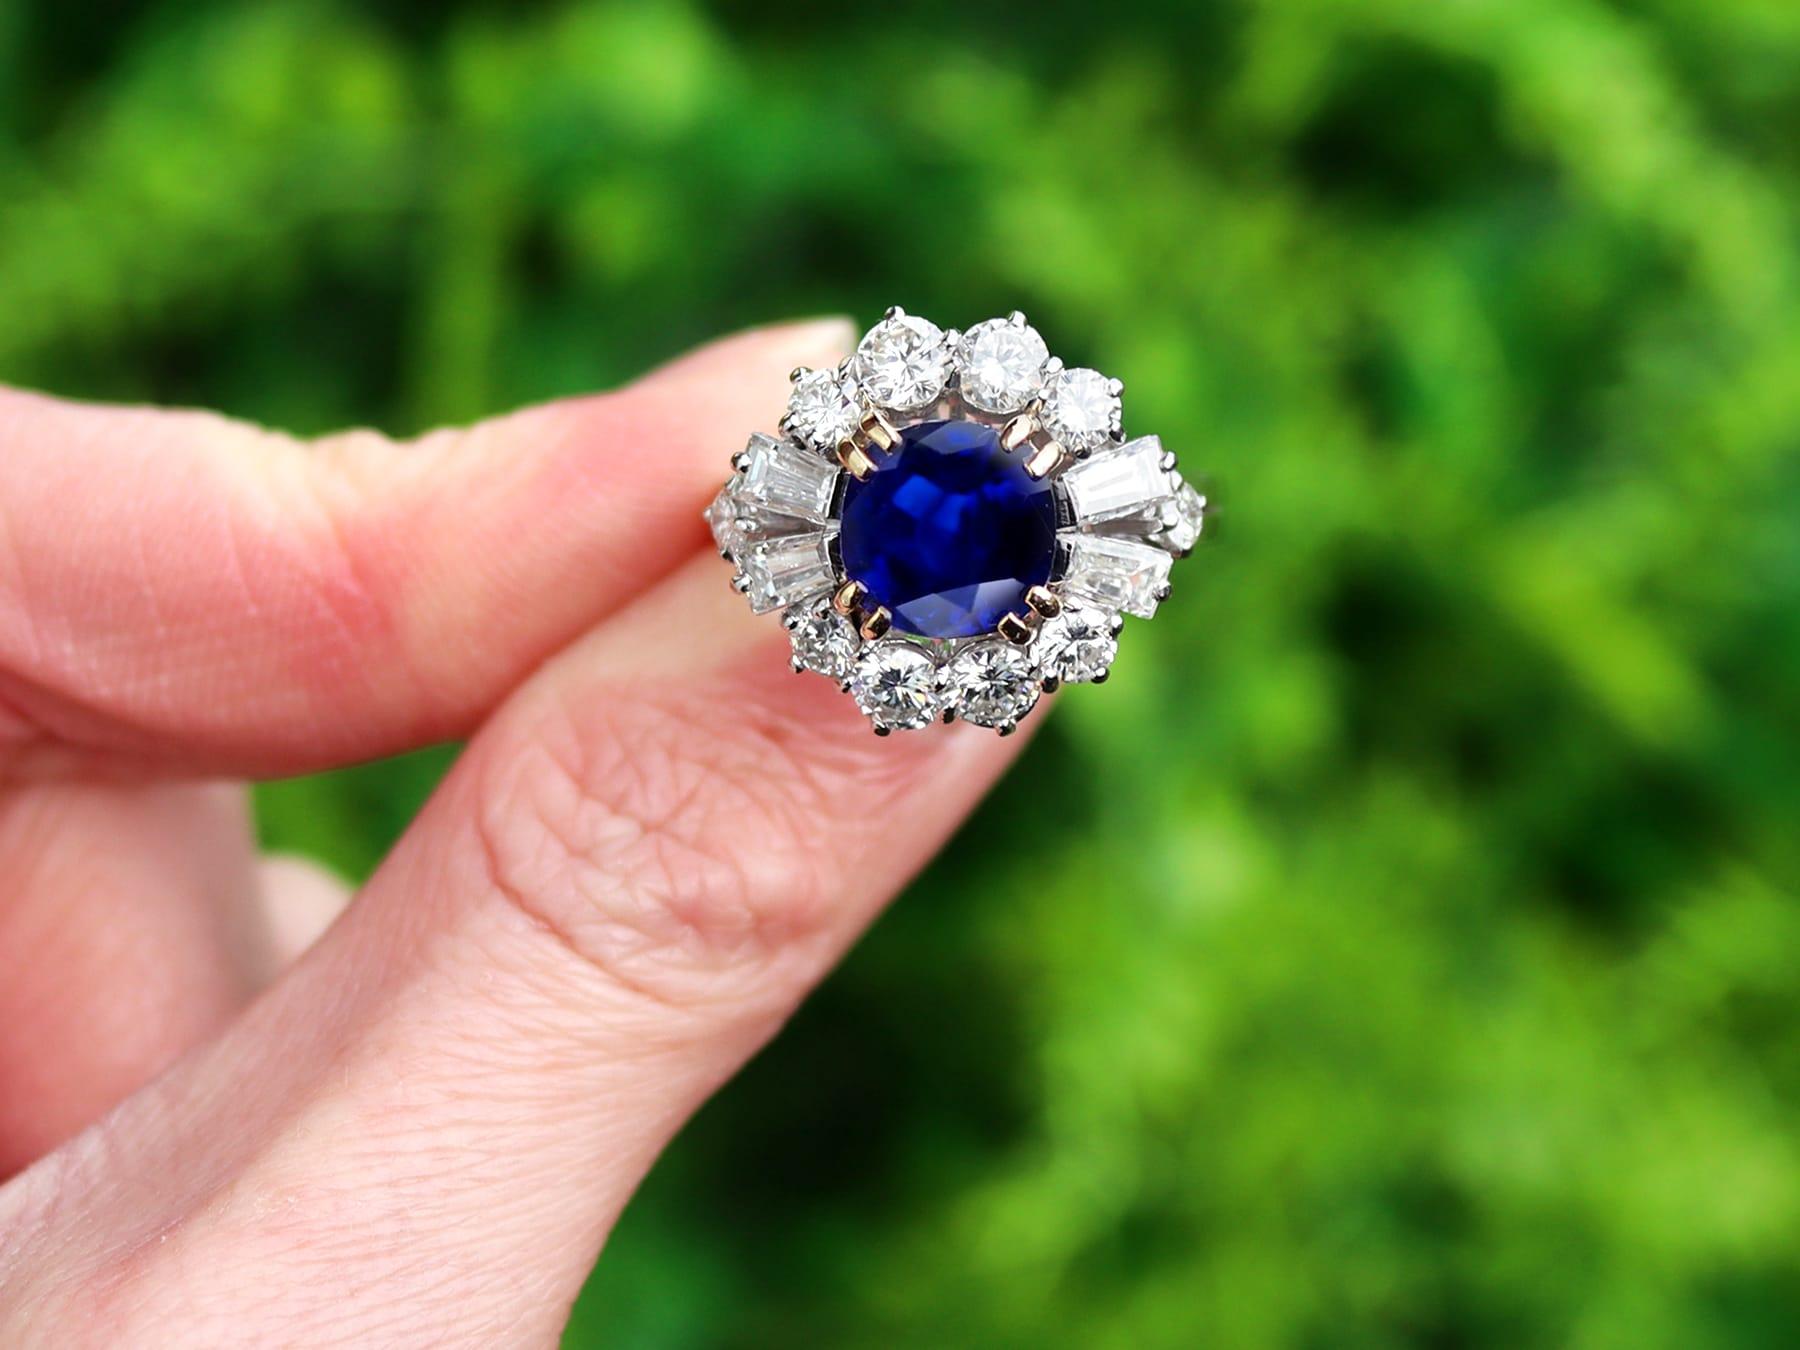 A stunning, fine and impressive vintage 3.48 carat unheated Madagascar sapphire and 2.10 carat diamond, 18 carat white gold and 18 carat yellow gold set cluster ring; part of our diverse vintage jewellery and estate jewelry collections

This